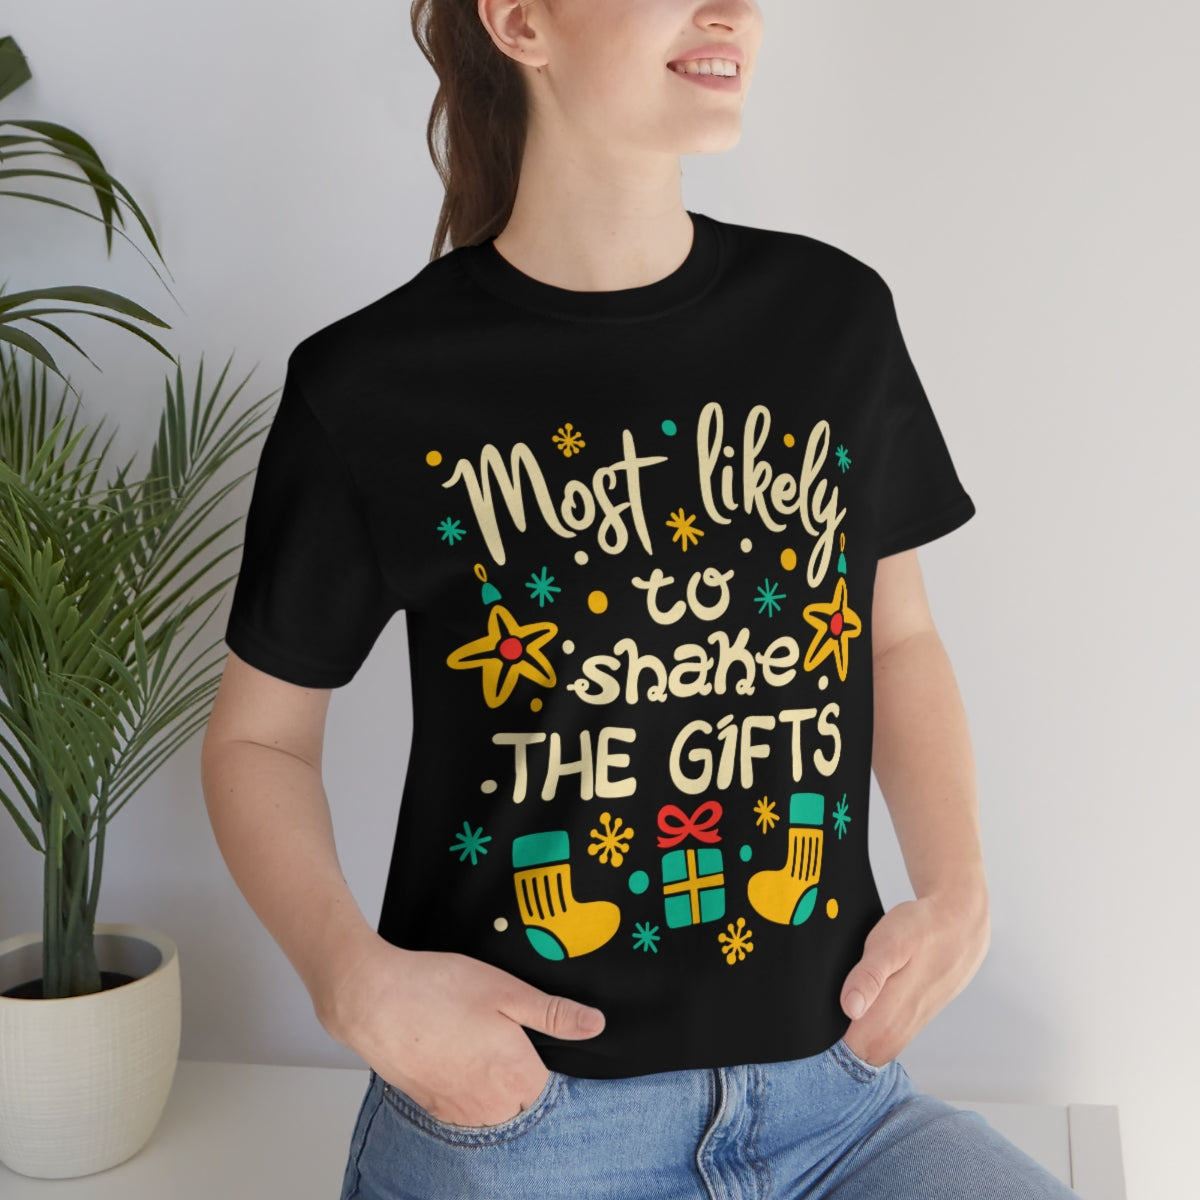 Most Likely to shake the gifts T-shirt for women or men, Most Likely To Christmas Shirts, Custom Most Likely T-Shirts - 37 Design Unit